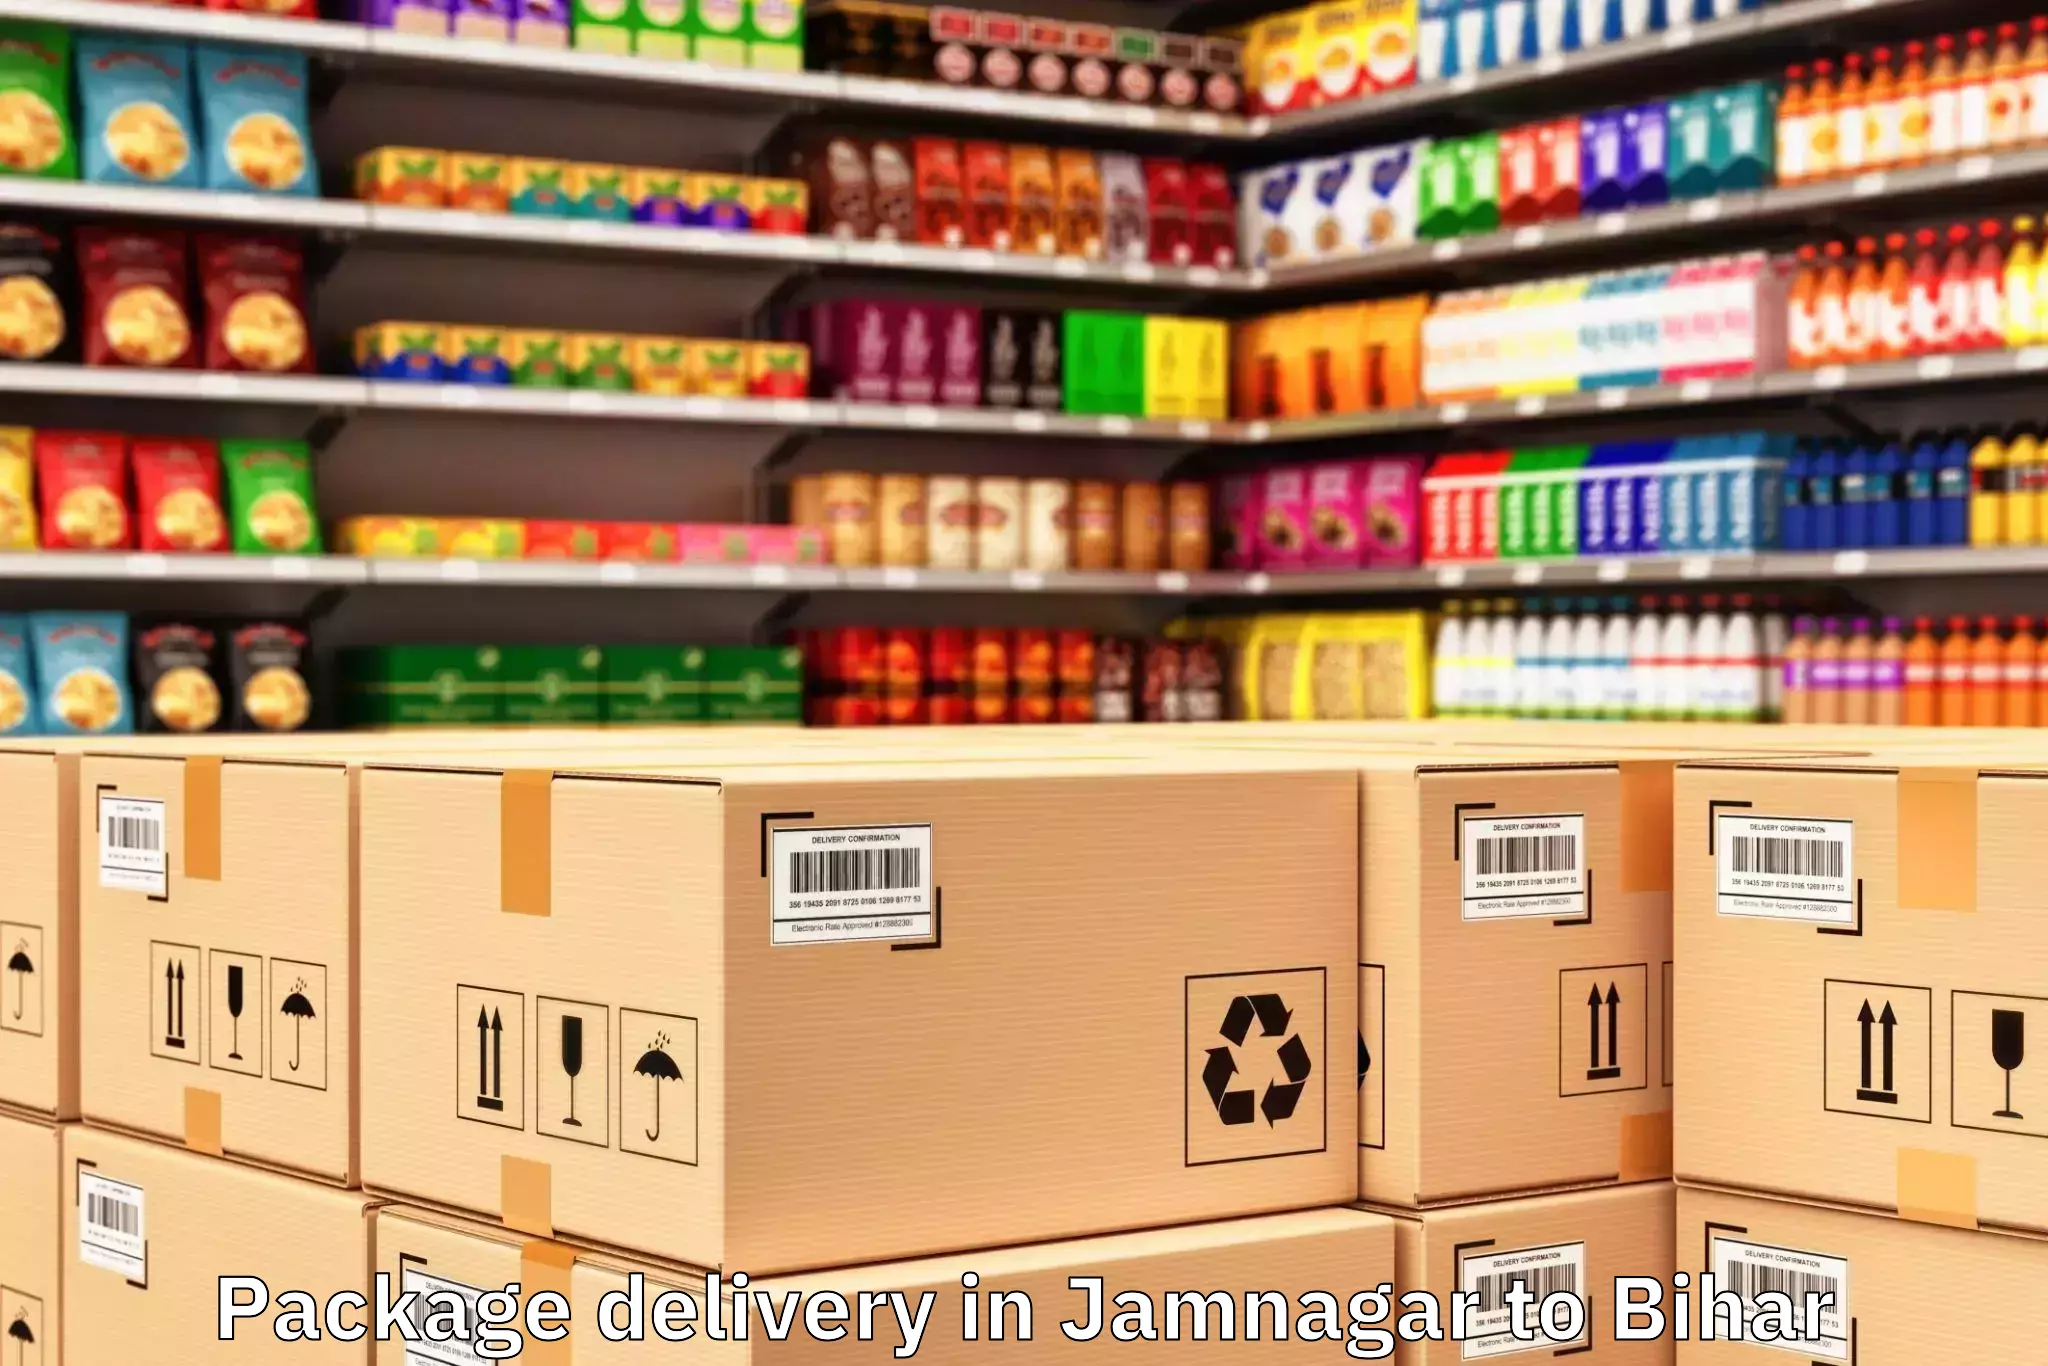 Quality Jamnagar to Bihar Package Delivery